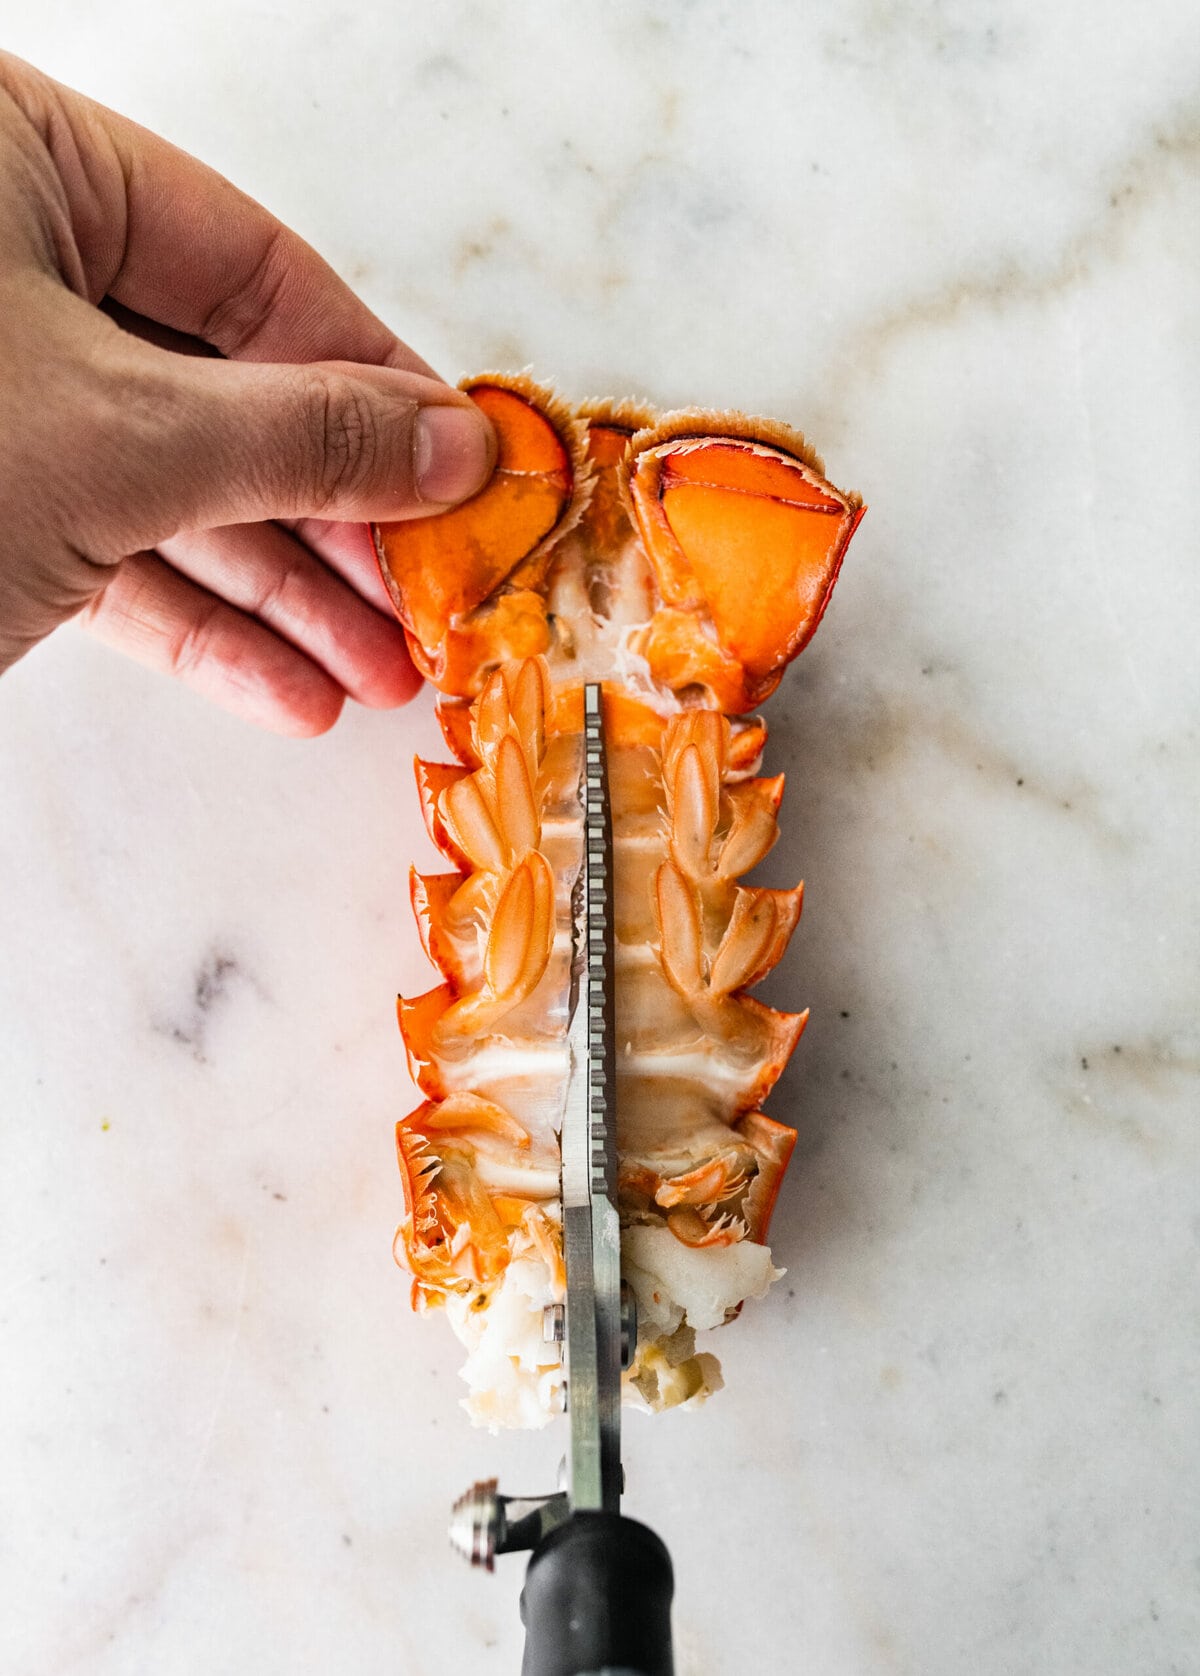 process of making classic lobster bisque: cutting lobster tail to get meat out.